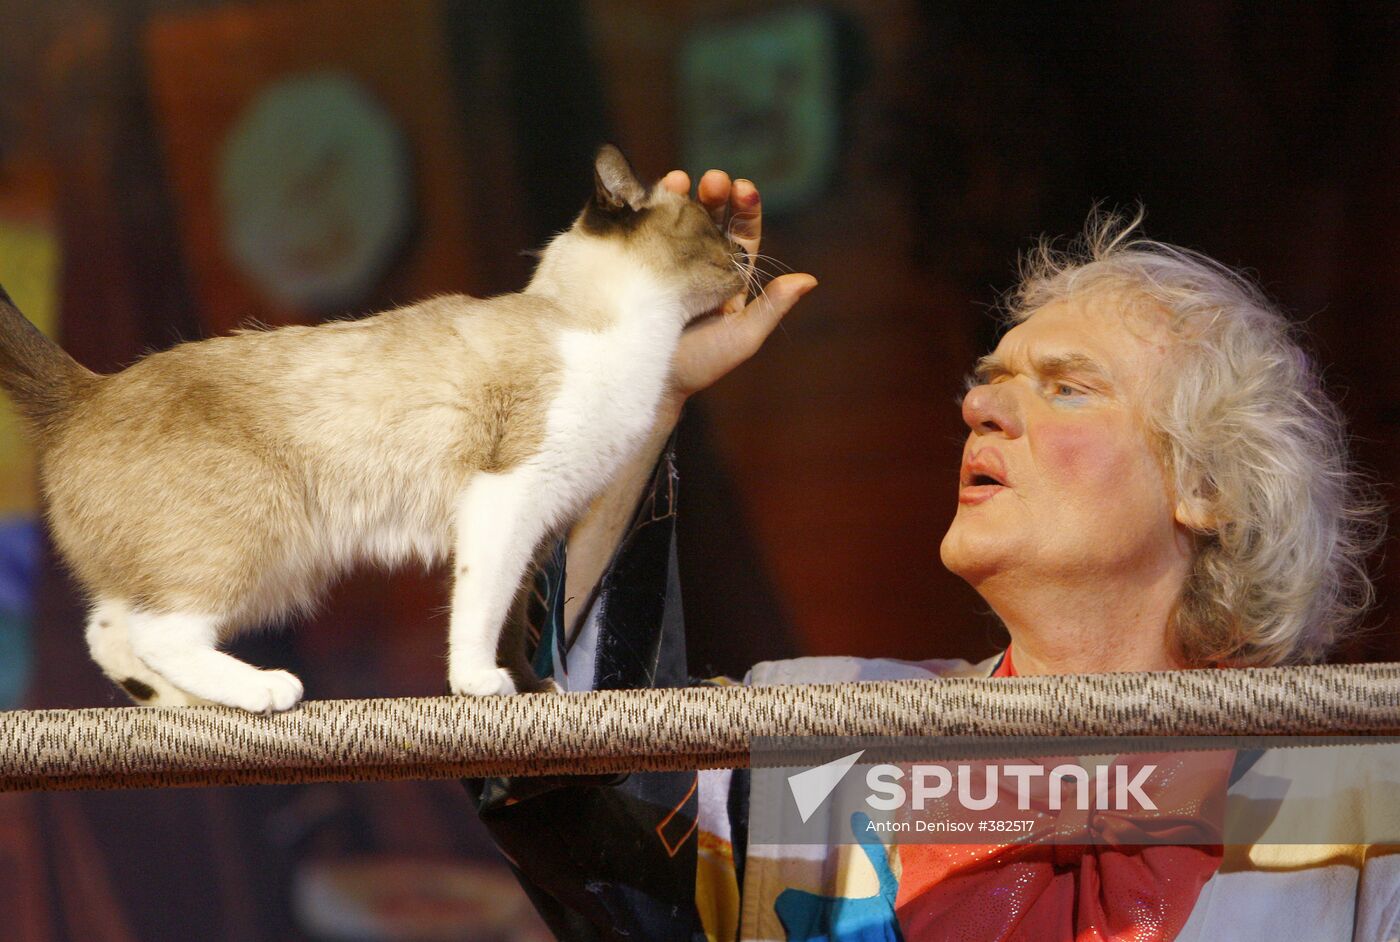 Yuri Kuklachev's performance "Queen of the Cats"